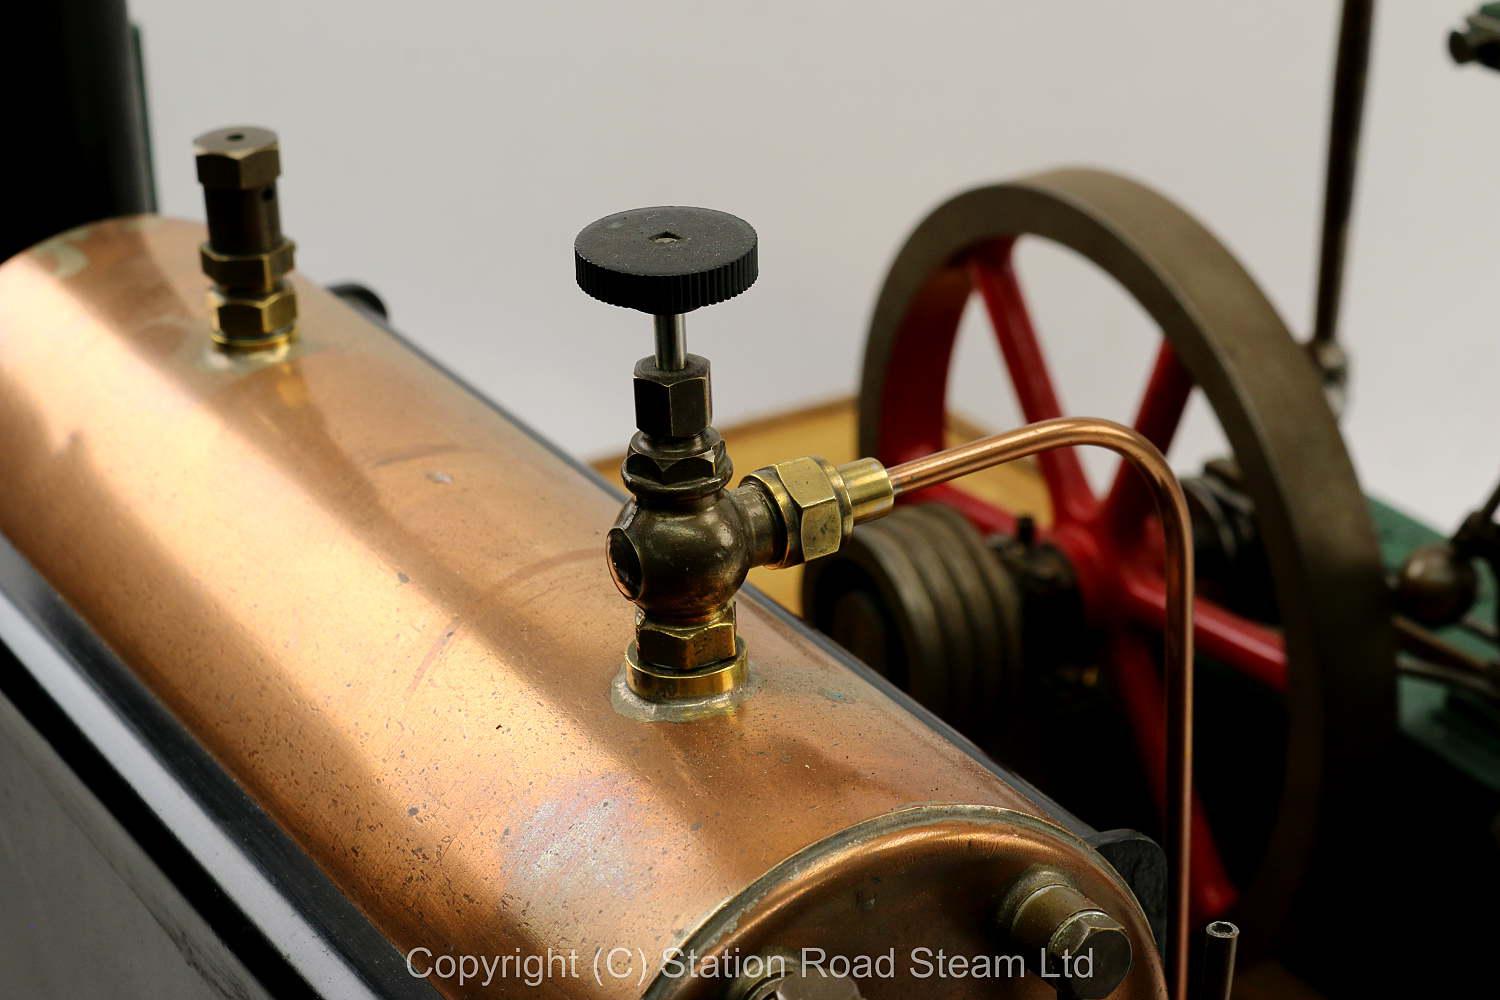 Stuart 504 boiler with beam engine, water tank and hand pump